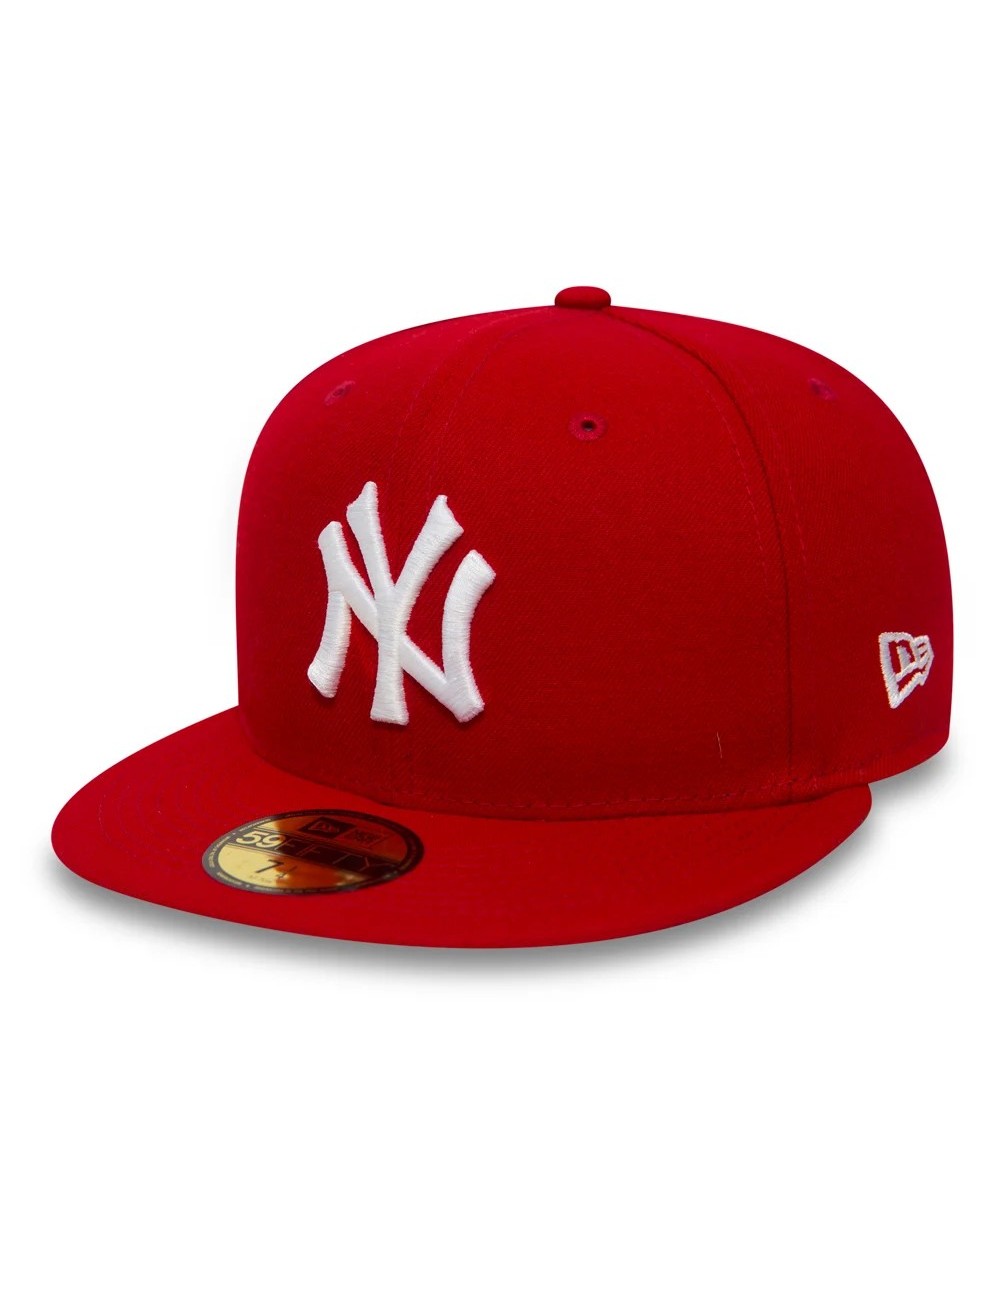 NEW ERA NEW YORK YANKEES 59 FIFTY CAP COLOUR RED SIZE 7 1/2